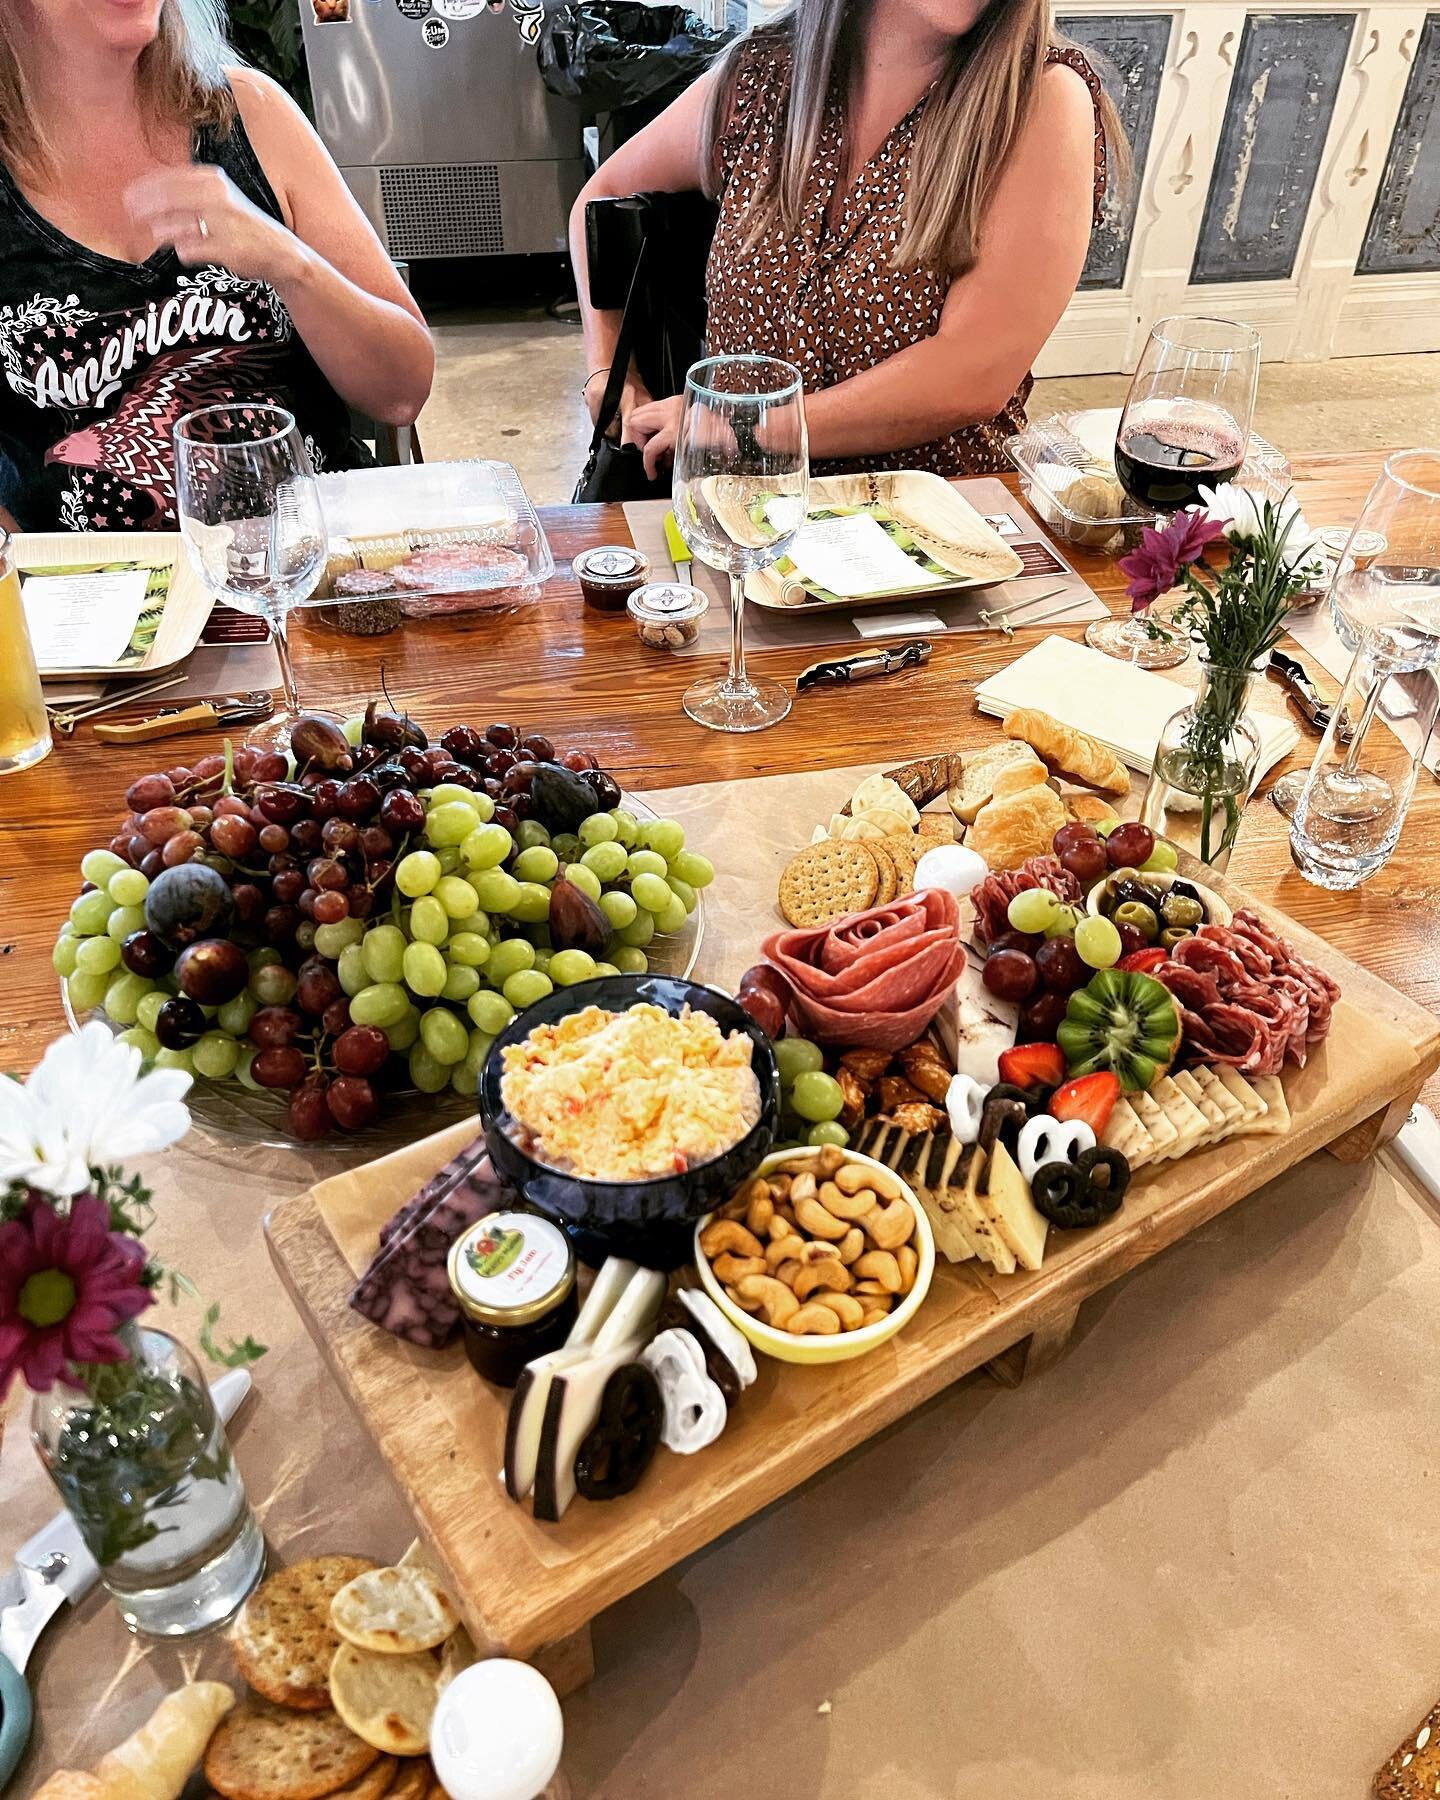 Great time at Dunes Brewery in Daytona, learning tips on how to build a charcuterie board and the wine pairings to go with it. I may have been over-served&hellip;